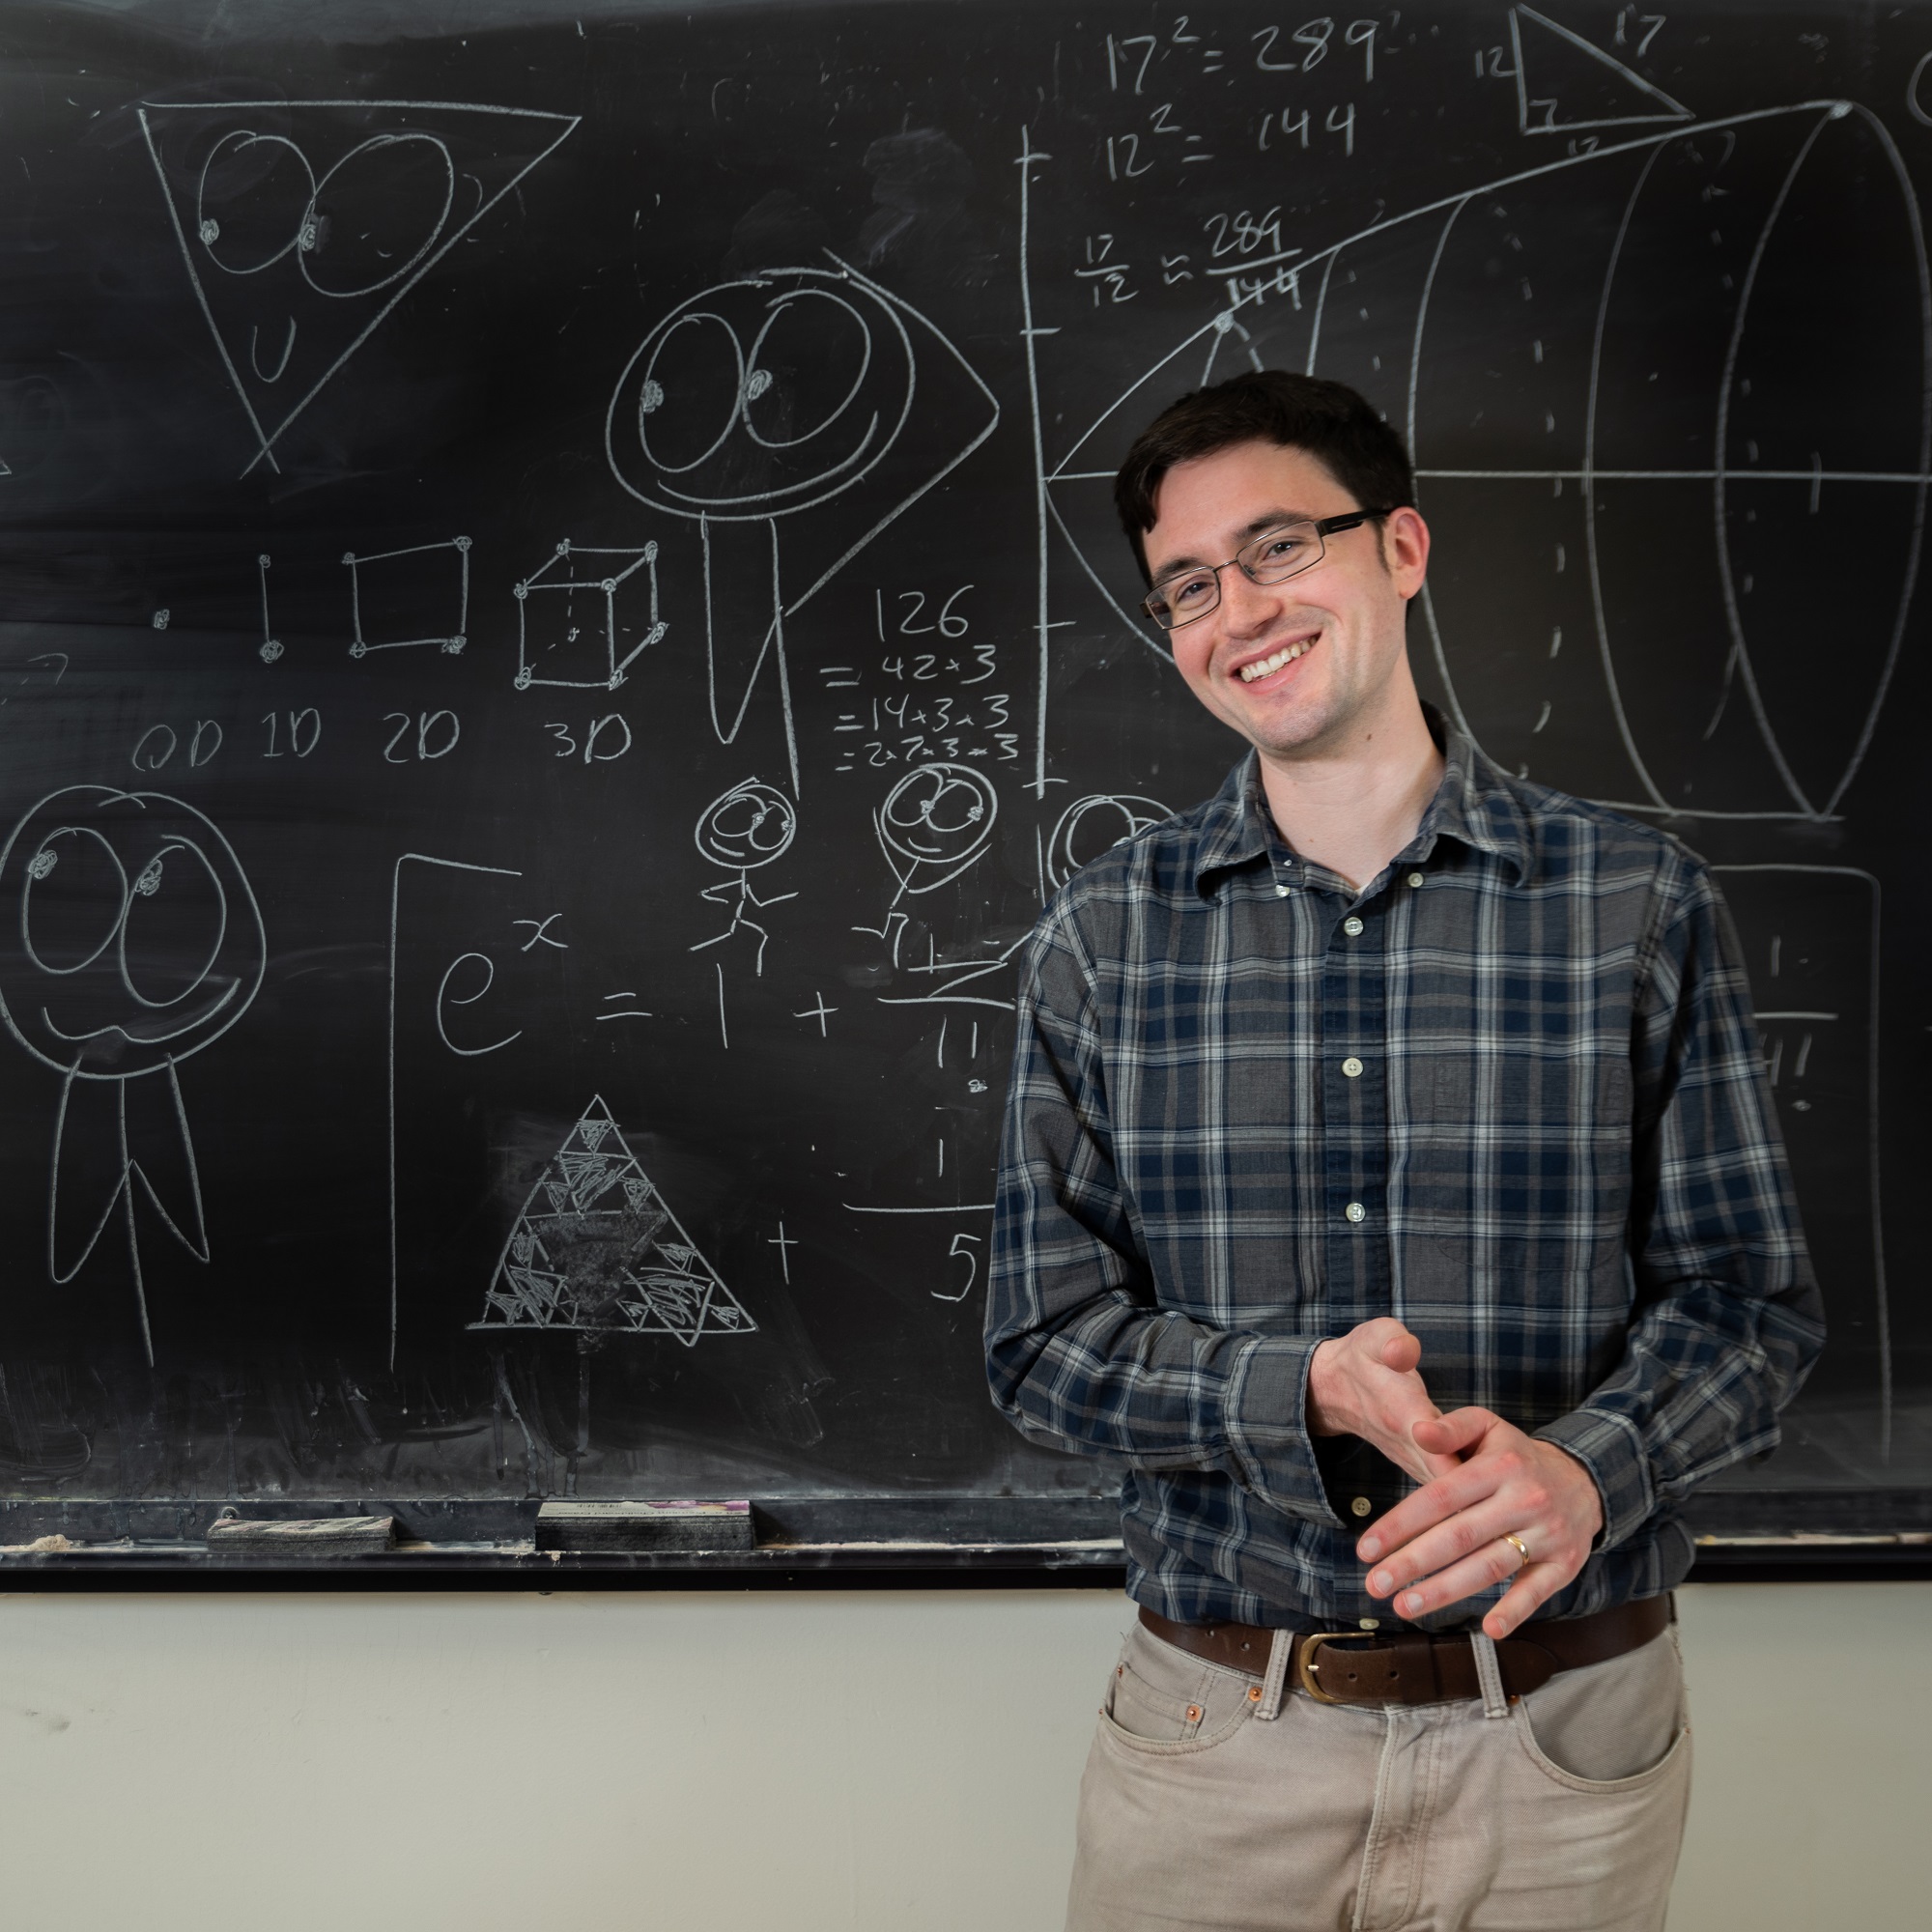 Ben Orlin smiling in front of a chalkboard with mathematics